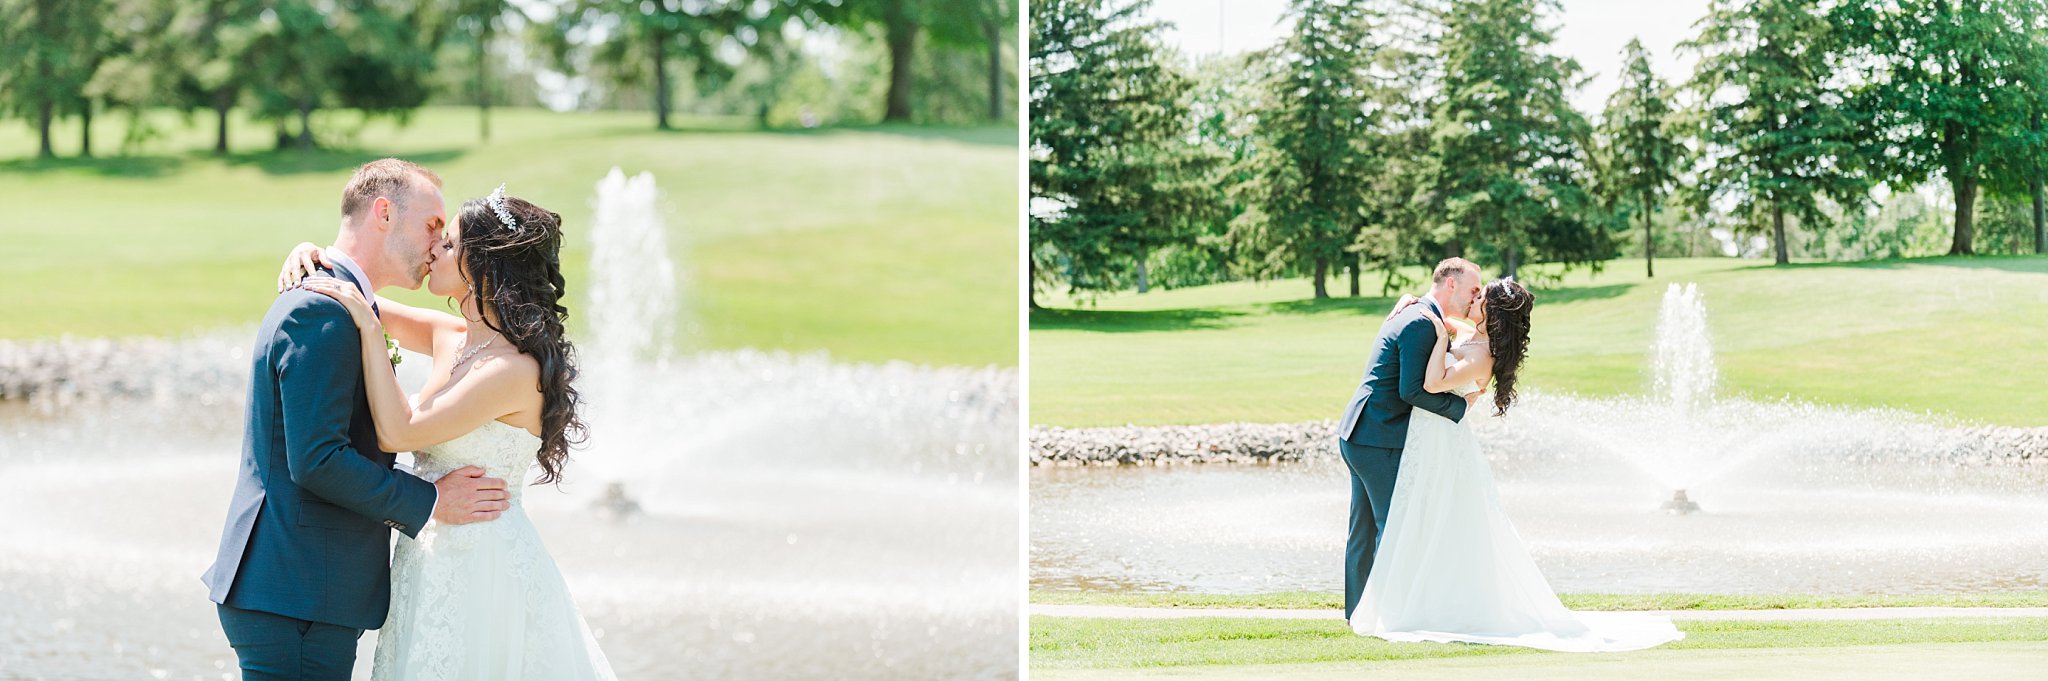 a bride and groom kiss in front of a fountain  kelowna wedding photographer